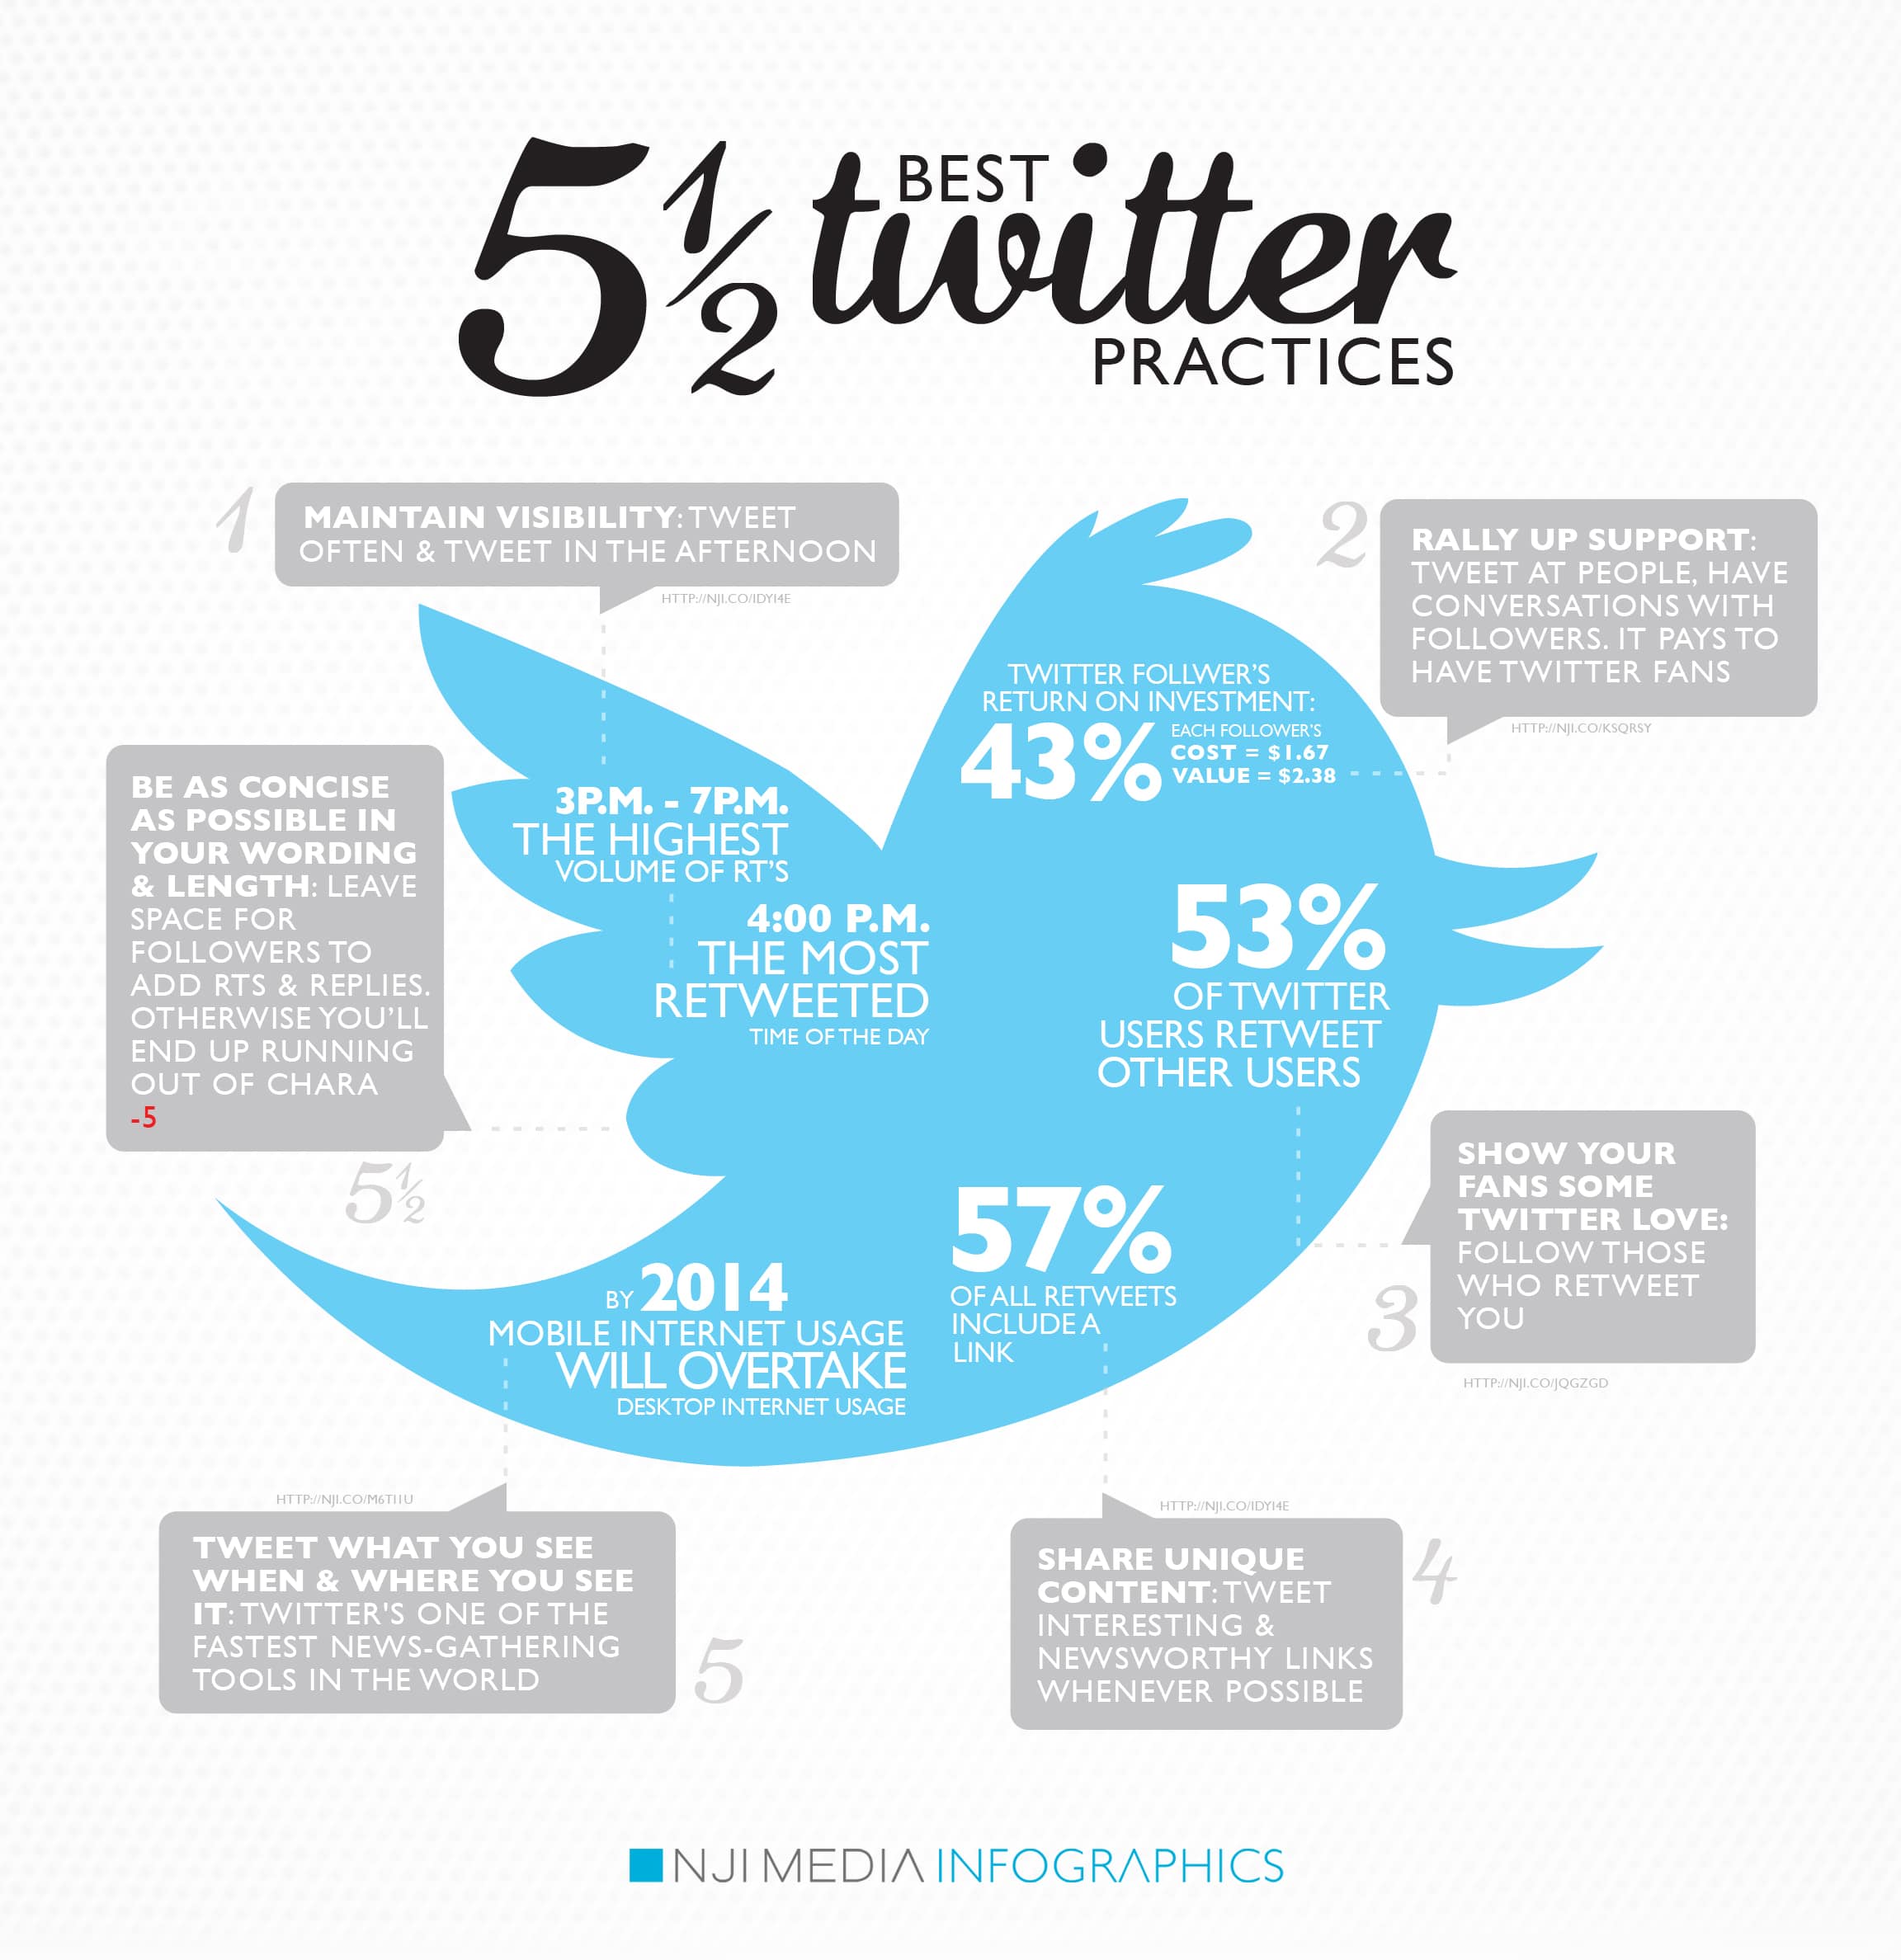 Best Twitter Practices In 2012 [Infographic]